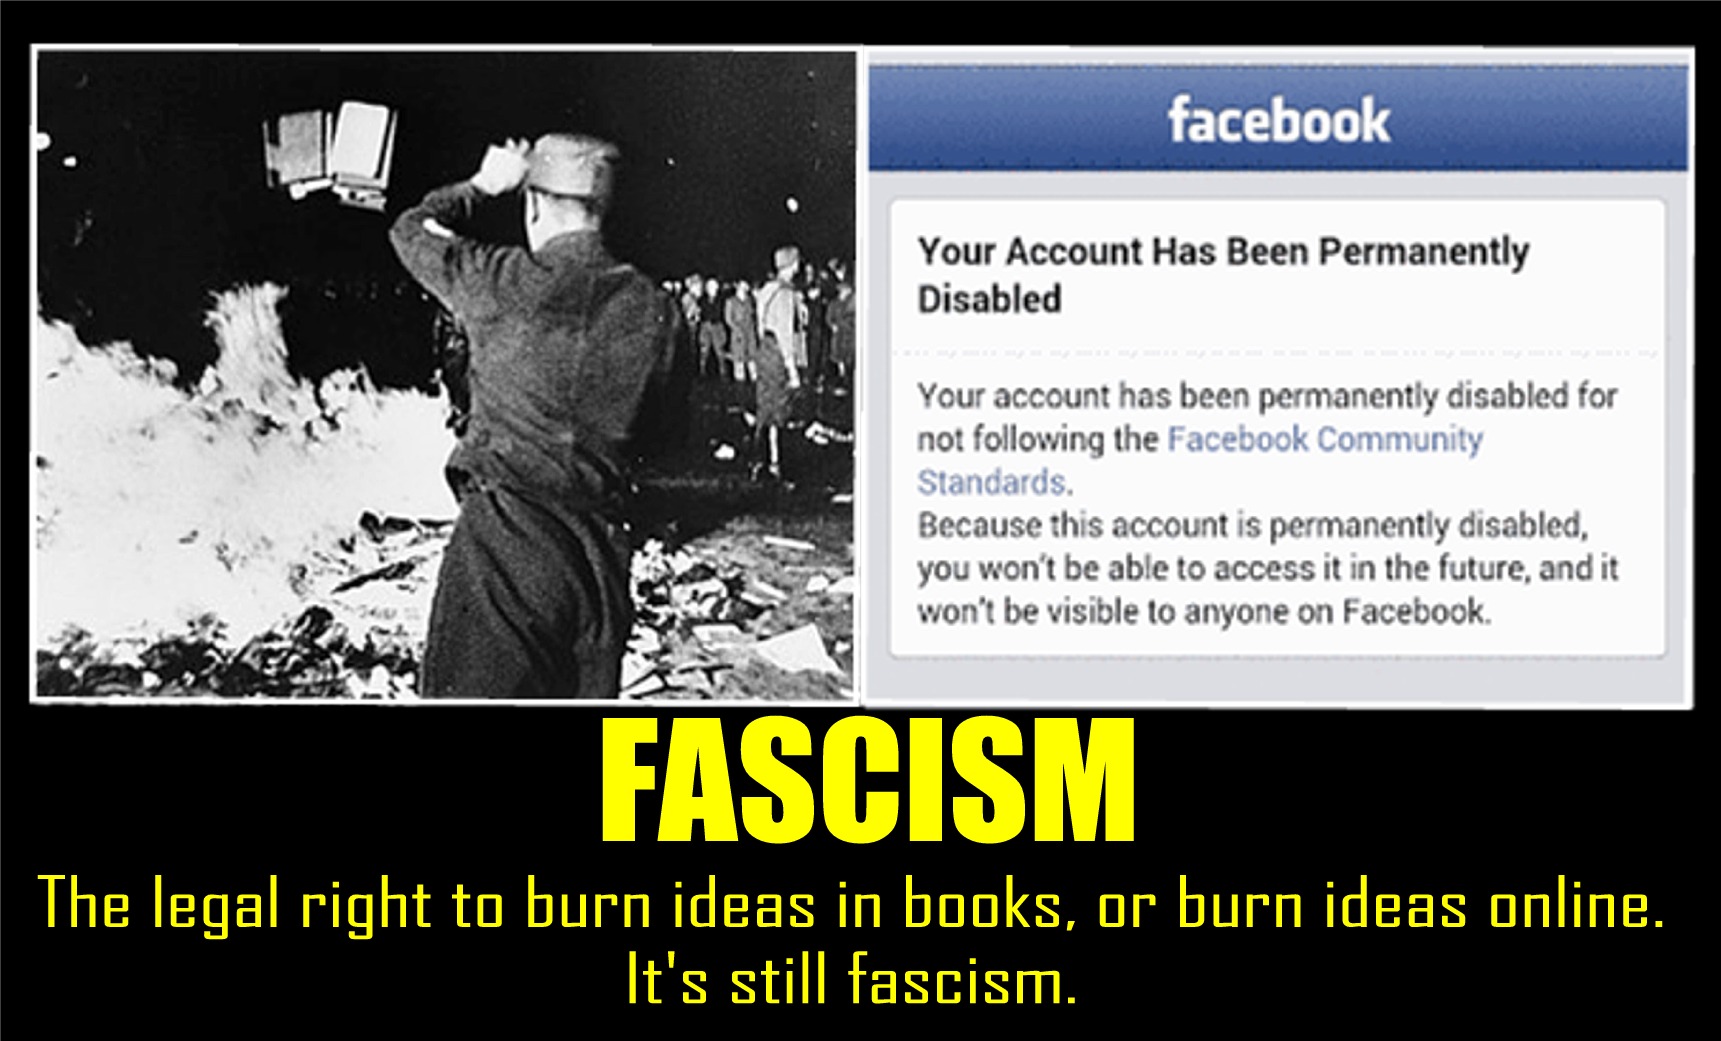 book burning in nazi germany - facebook Your Account Has Been Permanently Disabled Your account has been permanently disabled for not ing the Facebook Community Standards. Because this account is permanently disabled, you won't be able to access it in the